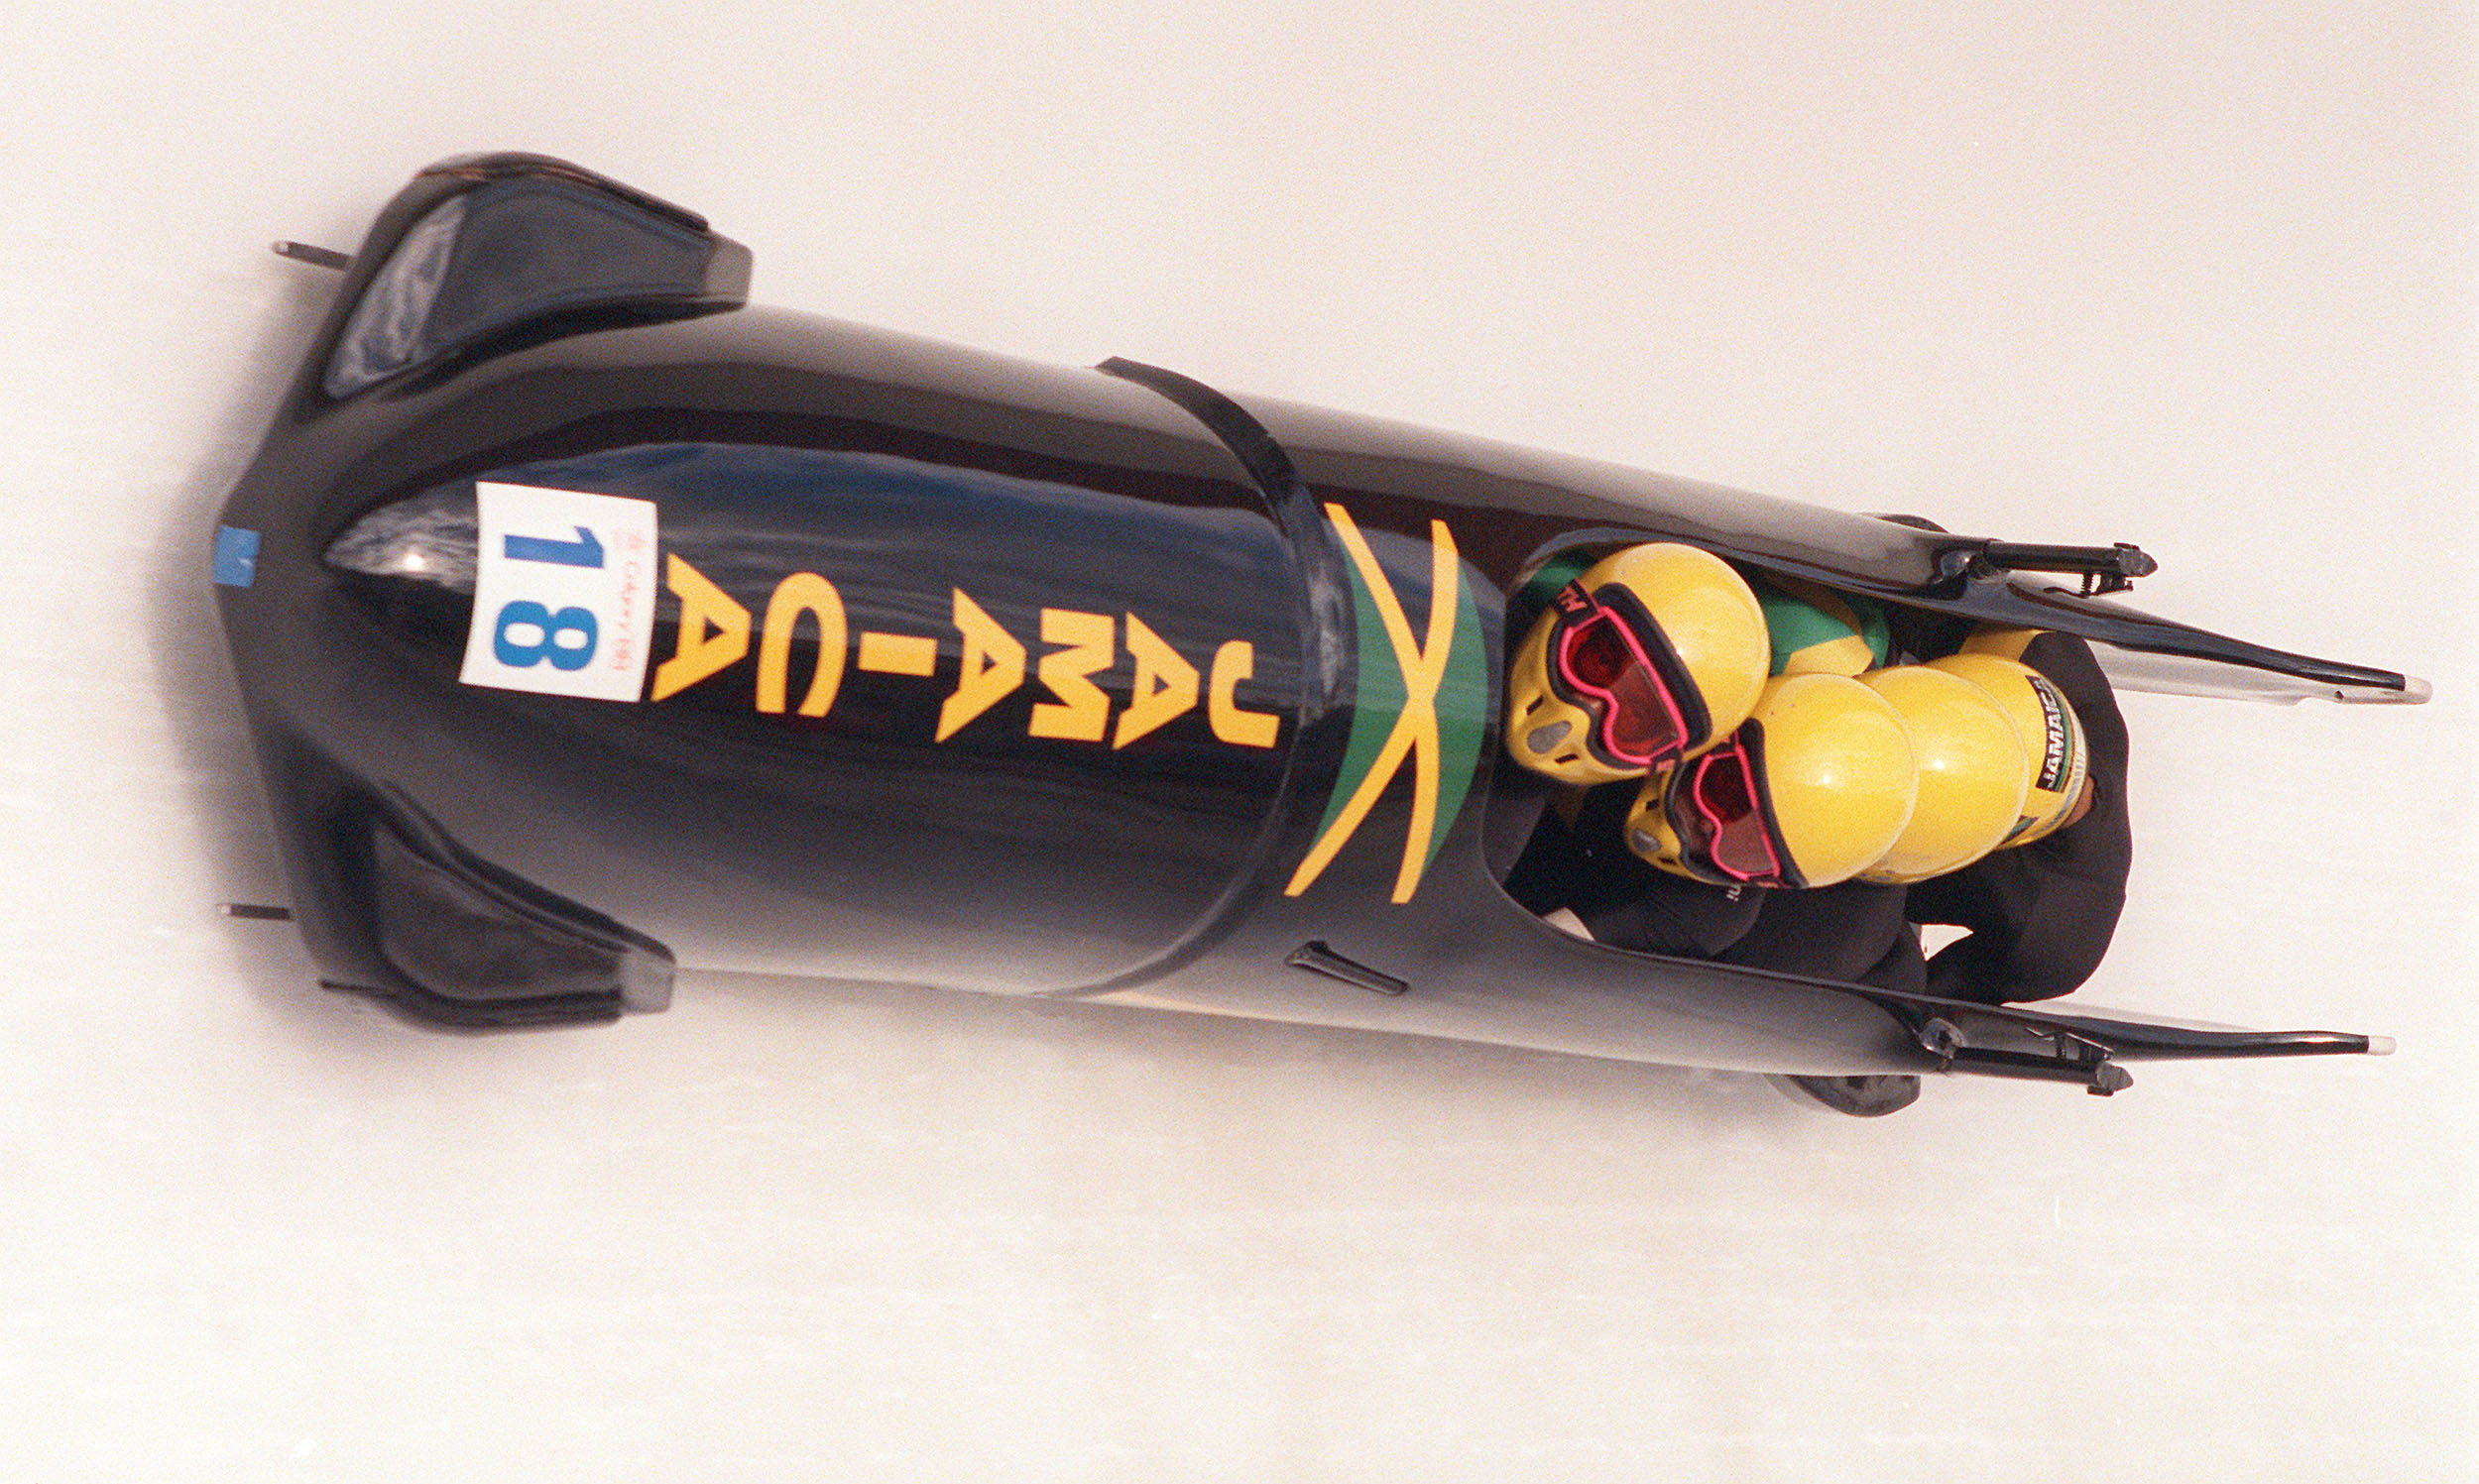 HD wallpaper, 2500X1500 Hd Desktop, Desktop Hd Bobsleigh Background Photo, Jamaican Bobsled Inspiration, Olympic Dreams, Unforgettable Journey, Cool Runnings Legacy